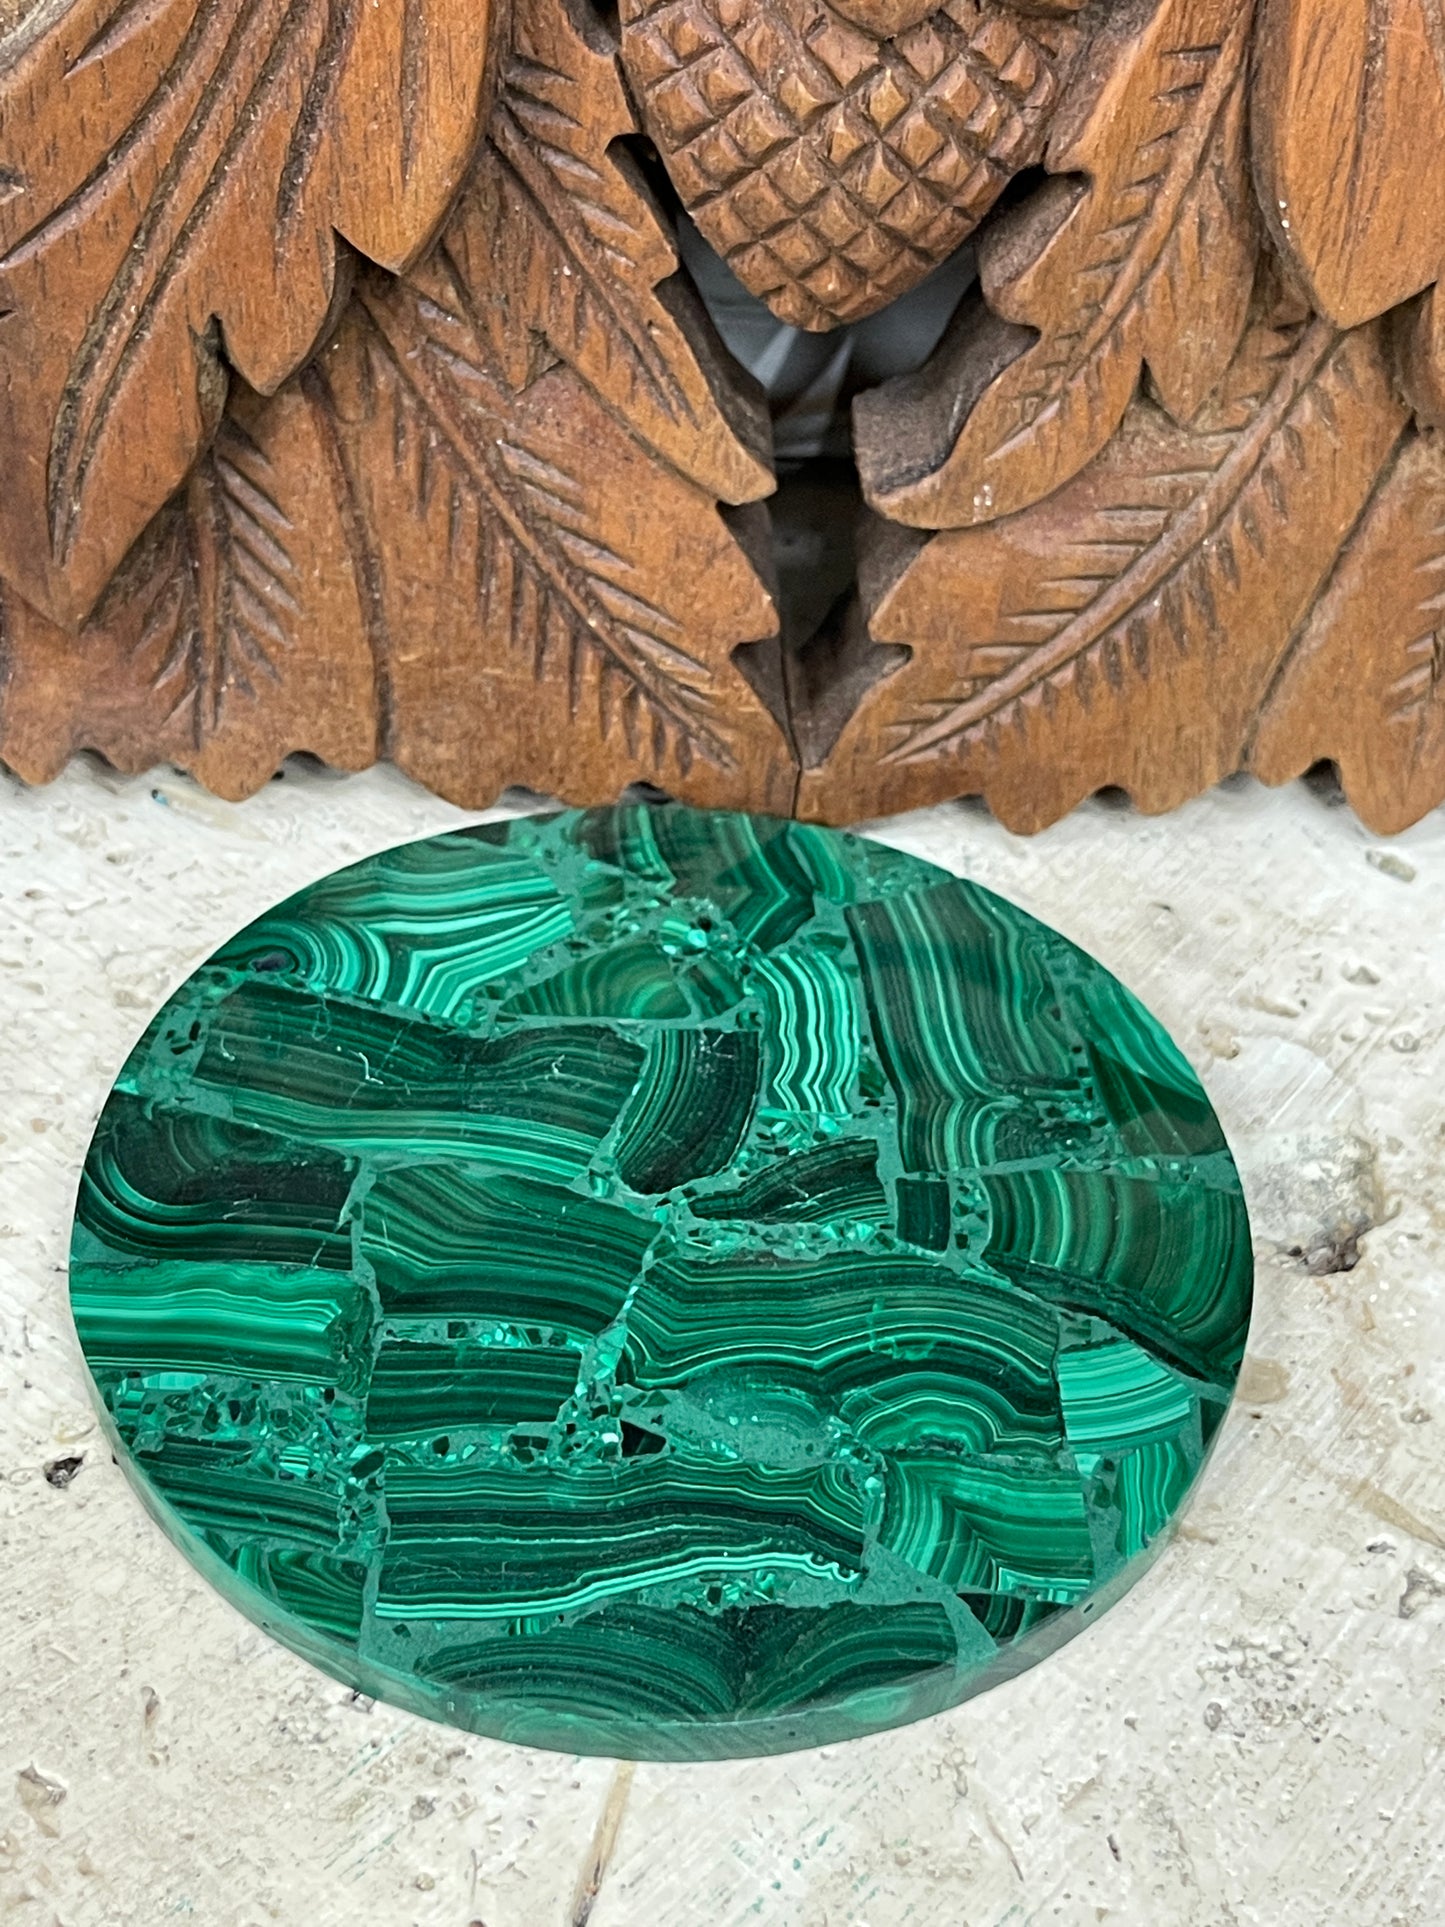 Malachite Coasters or Cleansing tiles from Africa